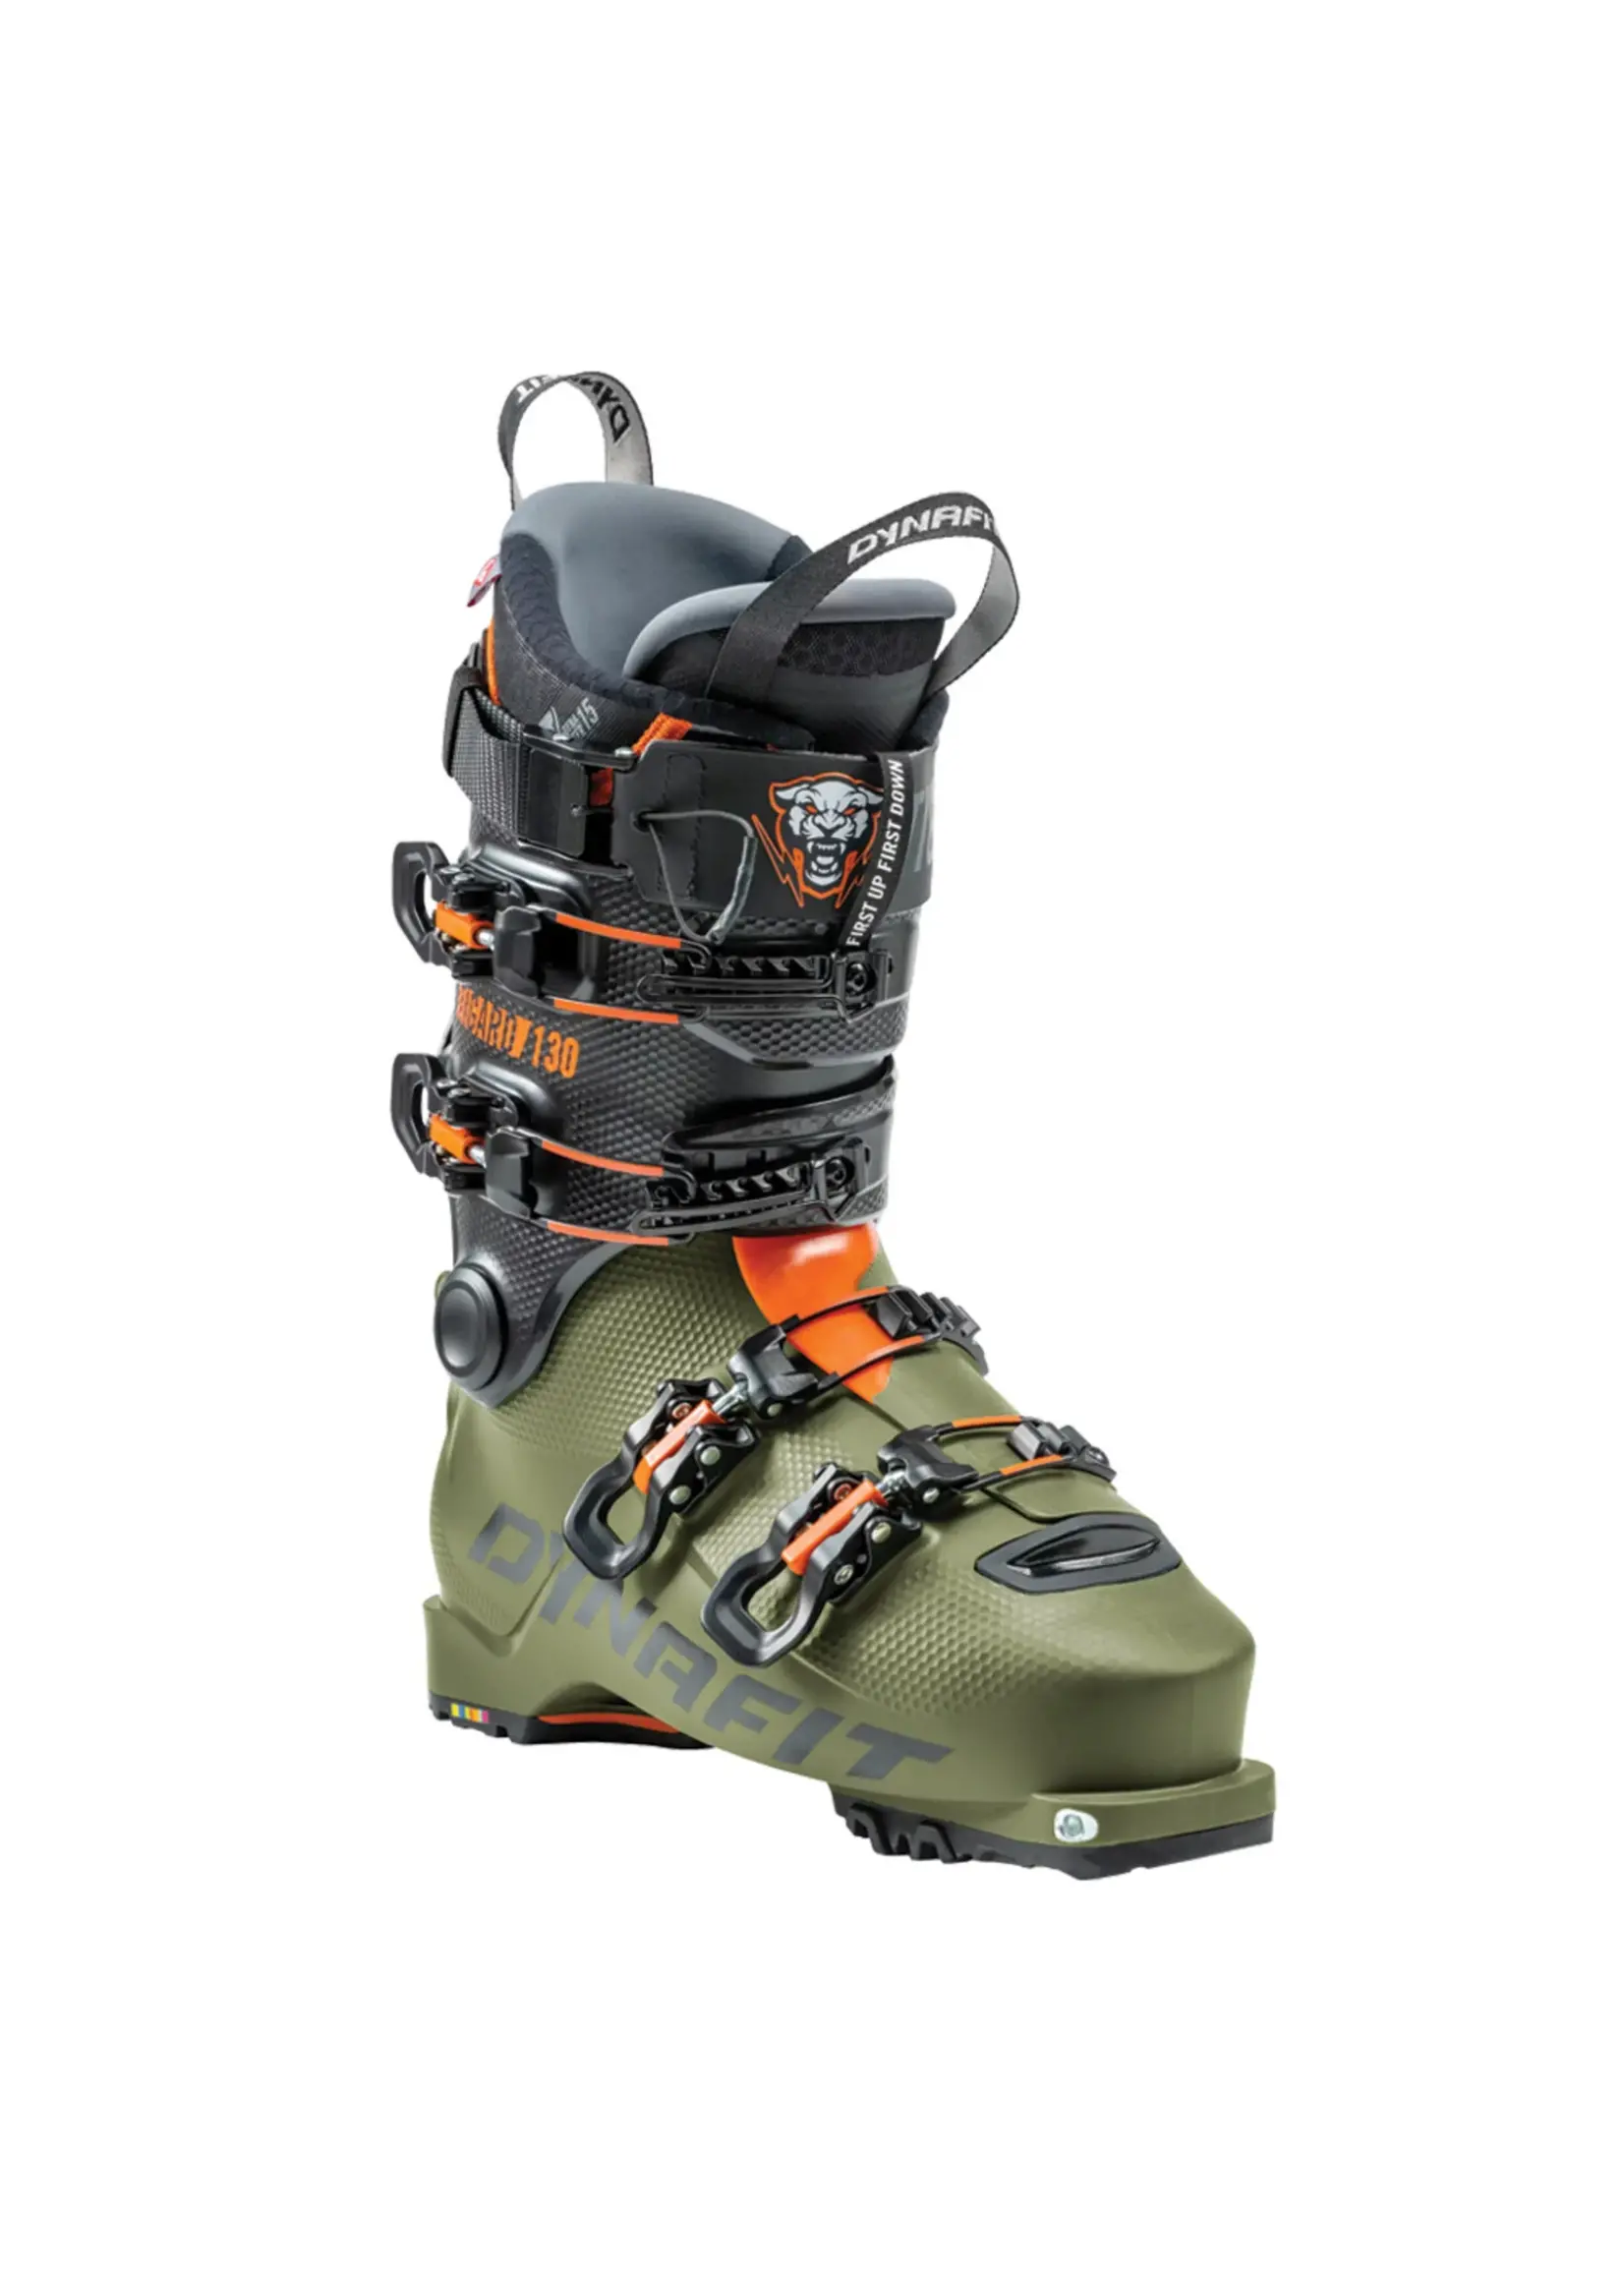 Dynafit Touring Boot Tigard 130